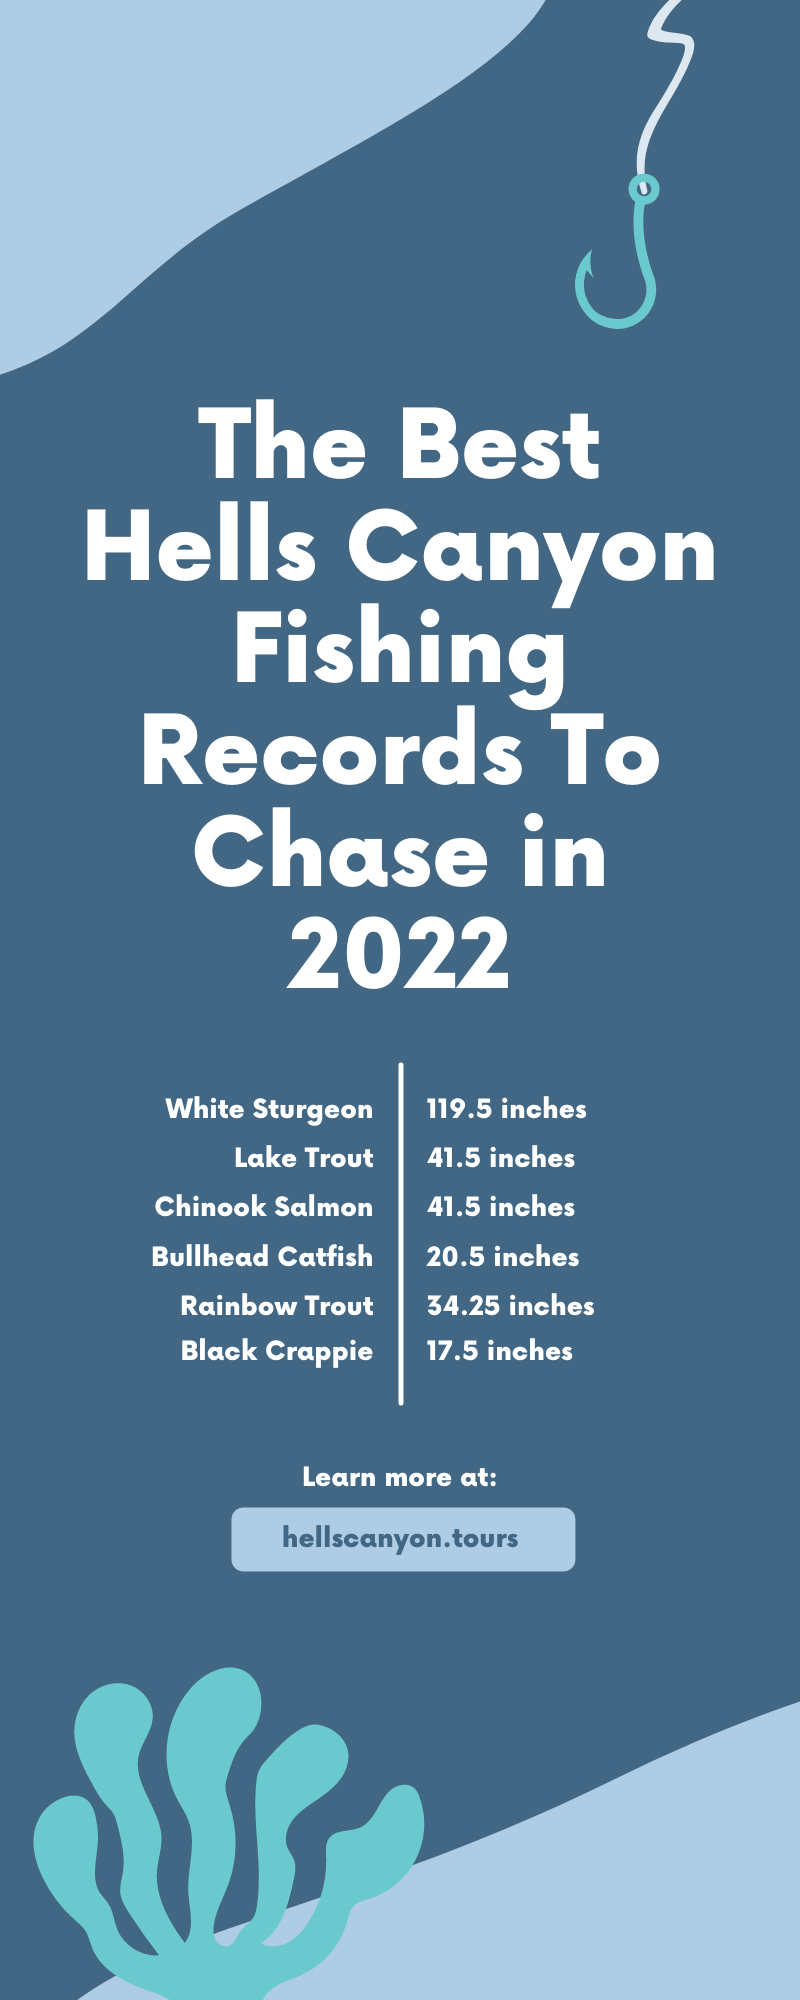 The Best Hells Canyon Fishing Records To Chase in 2022